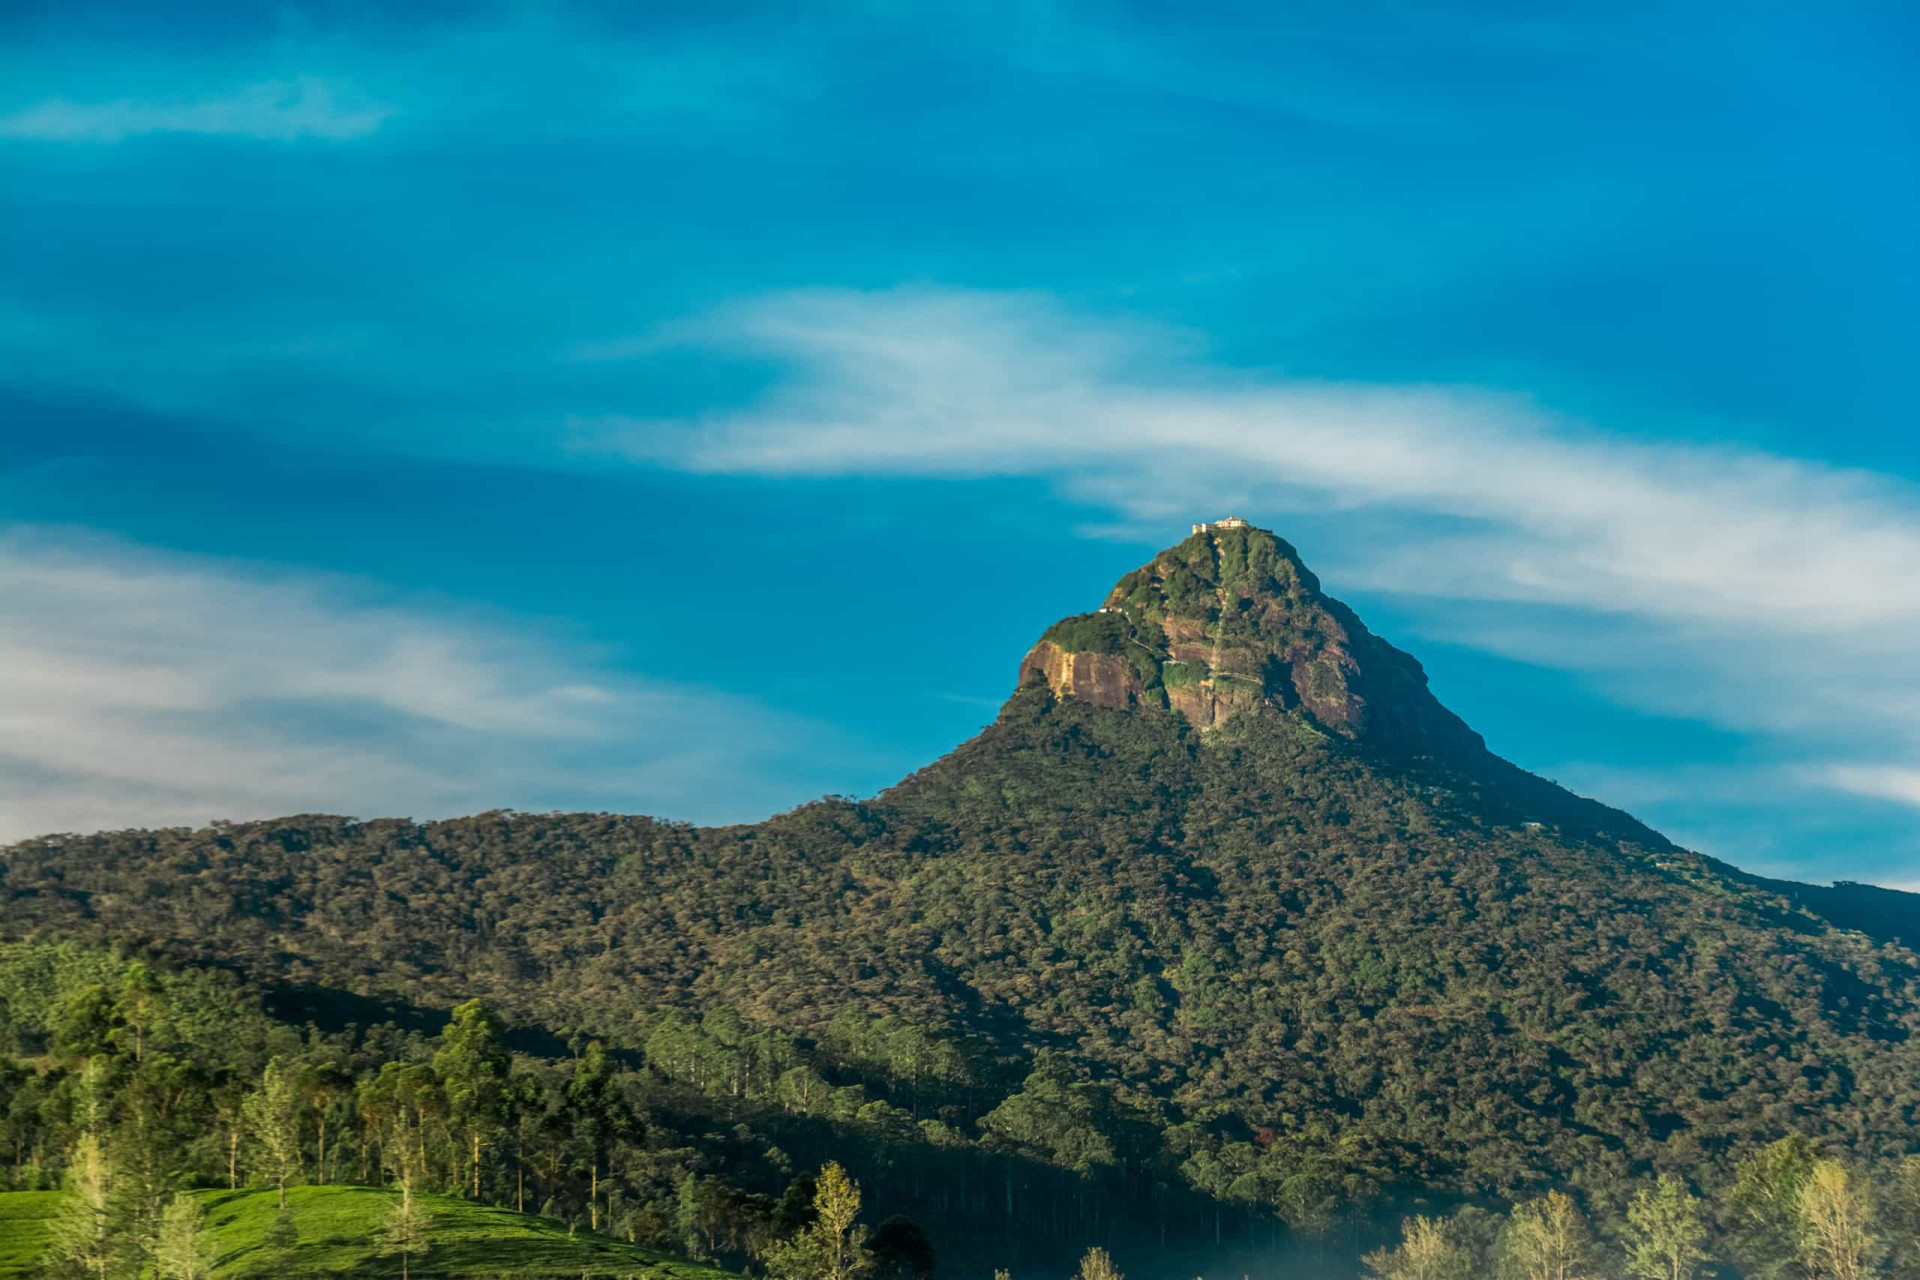 <p>This enormous conical mountain located in central Sri Lanka is revered as a holy site by Buddhists, Hindus, some Muslims and Christians.</p><p><a href="https://www.msn.com/en-us/community/channel/vid-7xx8mnucu55yw63we9va2gwr7uihbxwc68fxqp25x6tg4ftibpra?cvid=94631541bc0f4f89bfd59158d696ad7e">Follow us and access great exclusive content every day</a></p>